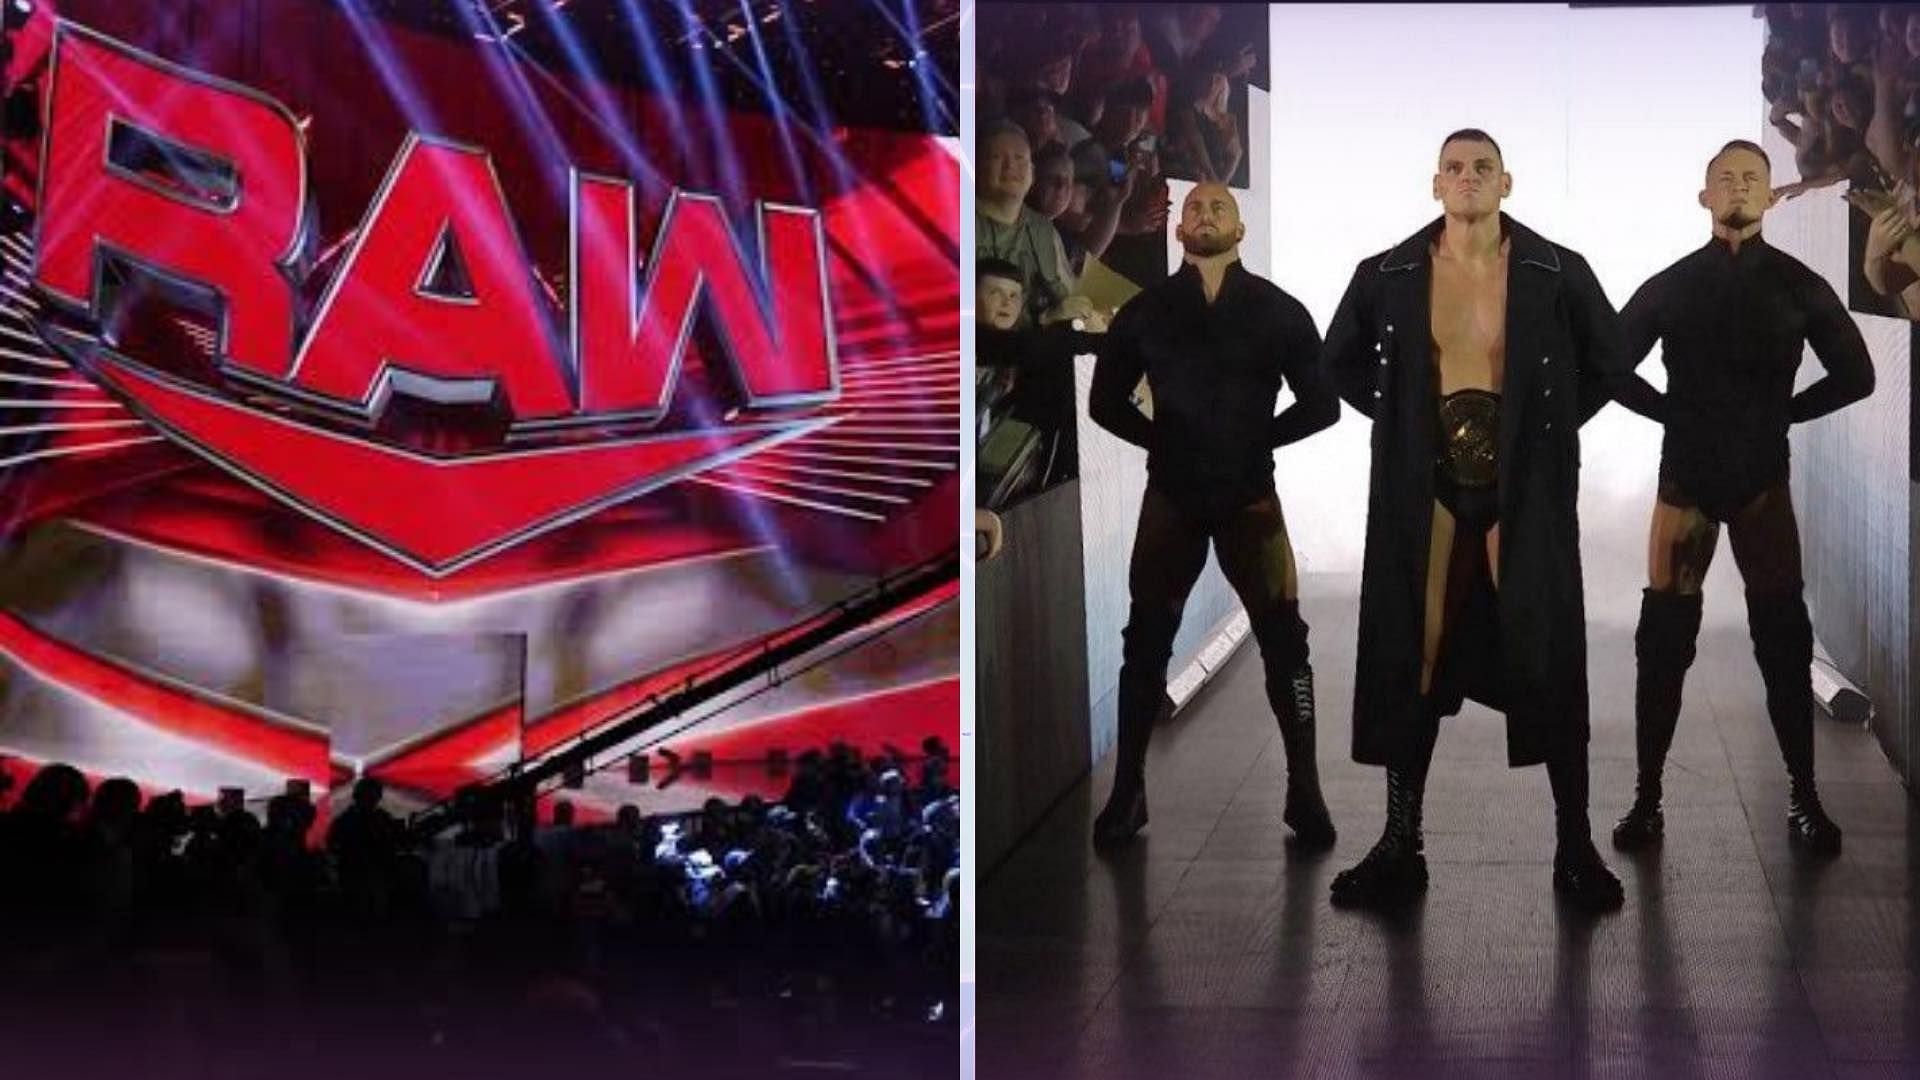 WWE RAW this week was live from the Capital One Arena in Washington, DC